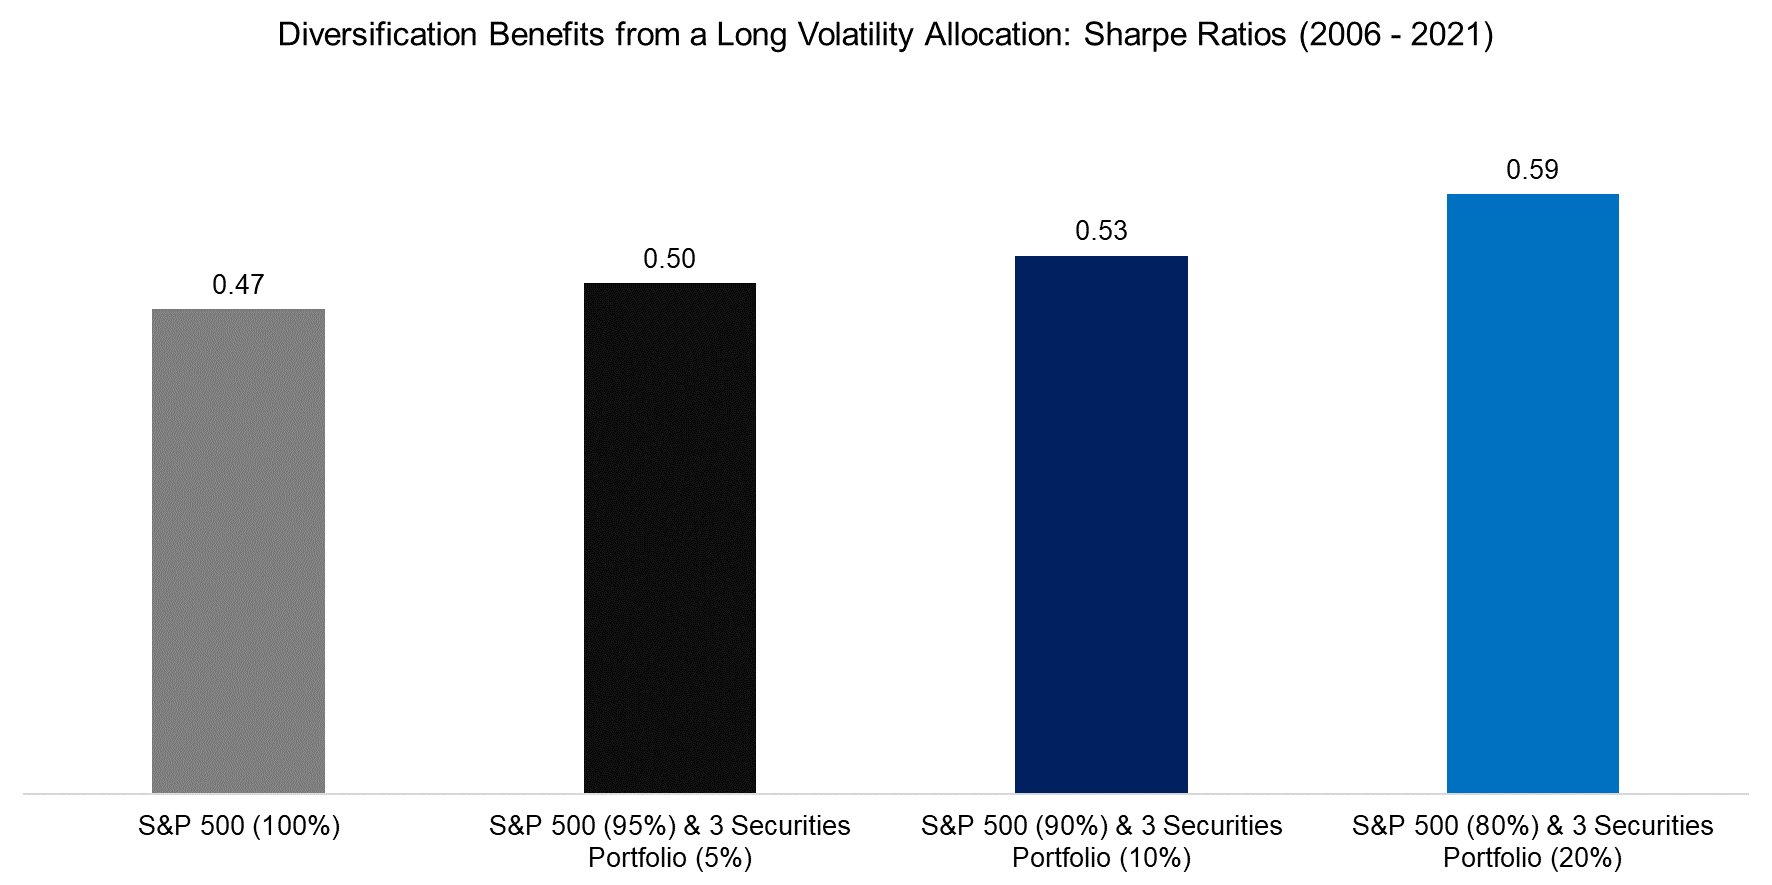 Diversification Benefits from a Long Volatility Allocation Sharpe Ratios (06-21)